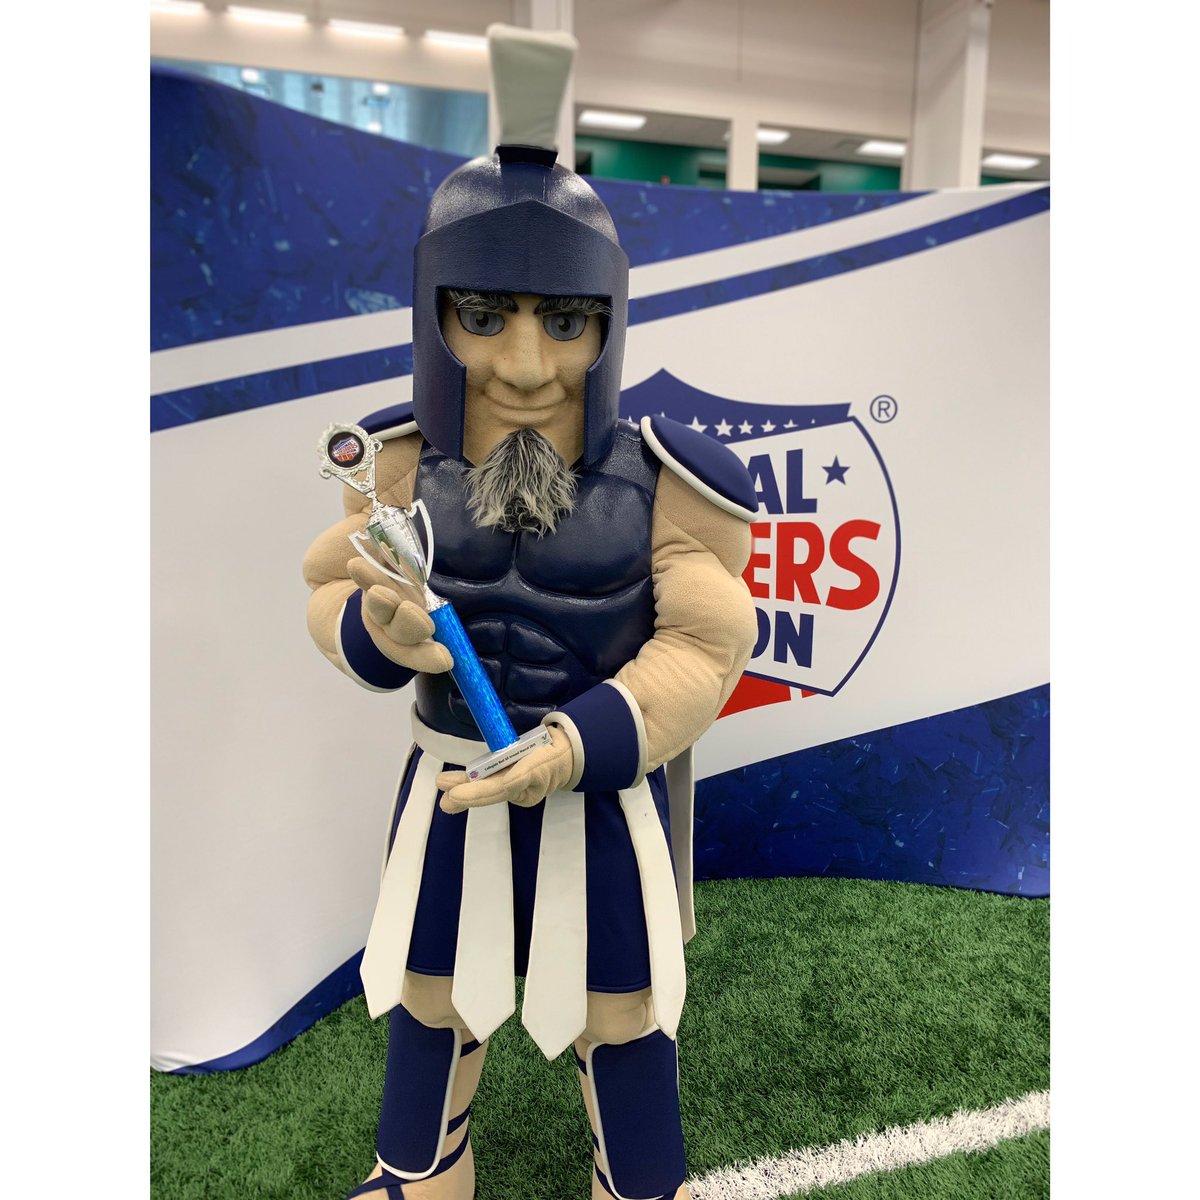 “TRI” The Triton made School History at NCA Camp today. He was awarded the 2019 NCA Collegiate Best Overall Mascot at NCA Camp. #TriTheTriton #TritonNation #TheTritonWay